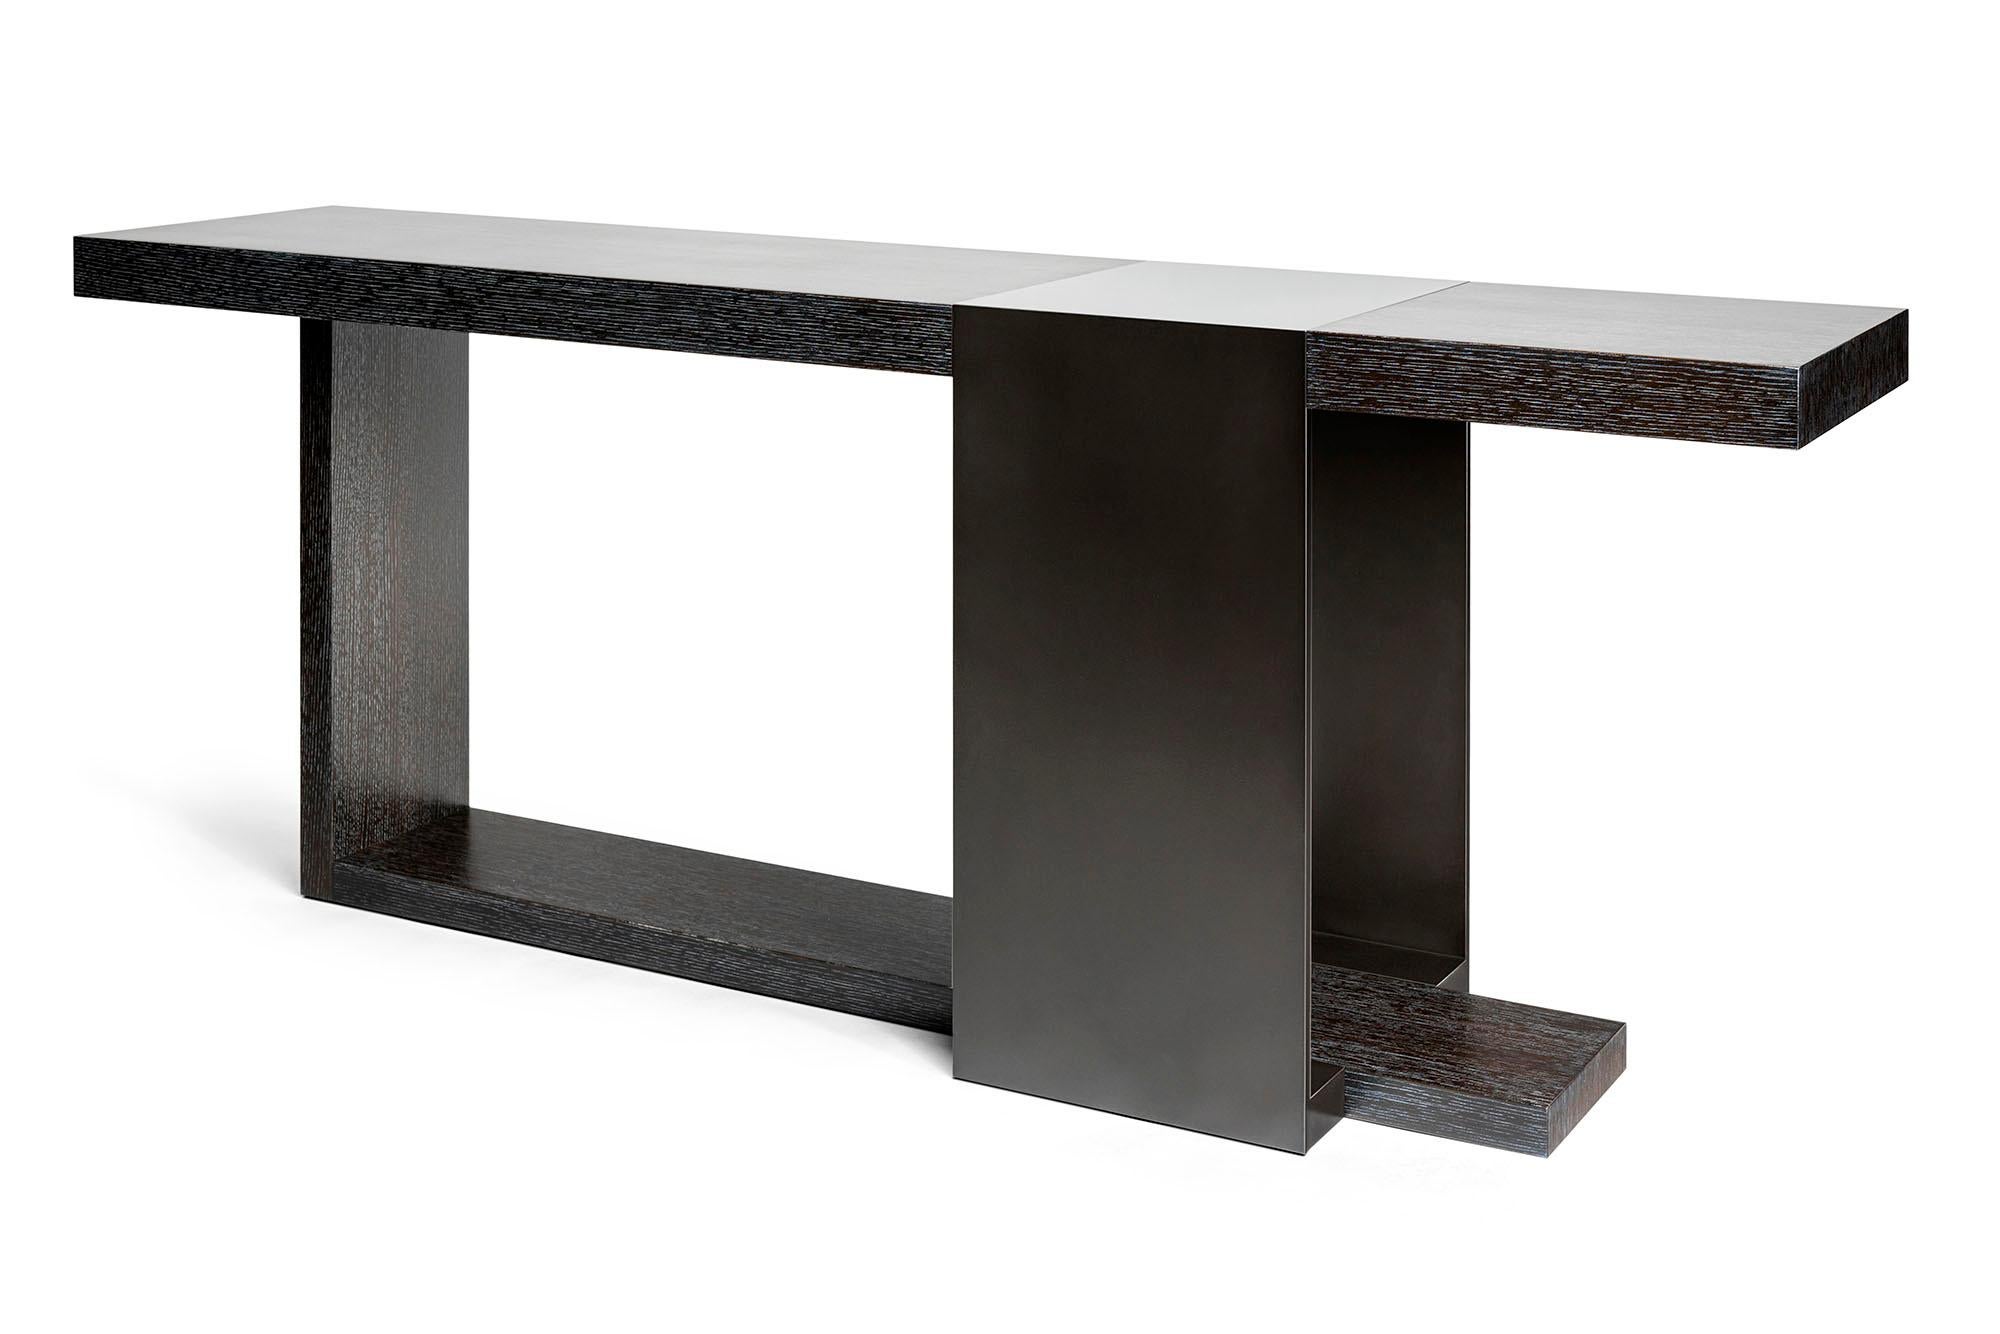 The LUMA design workshop strap console table is the result of thoughtful design and expert craftsmanship. The top and leg are made of wood with a char oak finish, while the strap base is made of metal which has a charcoal powder coat finish.

Like